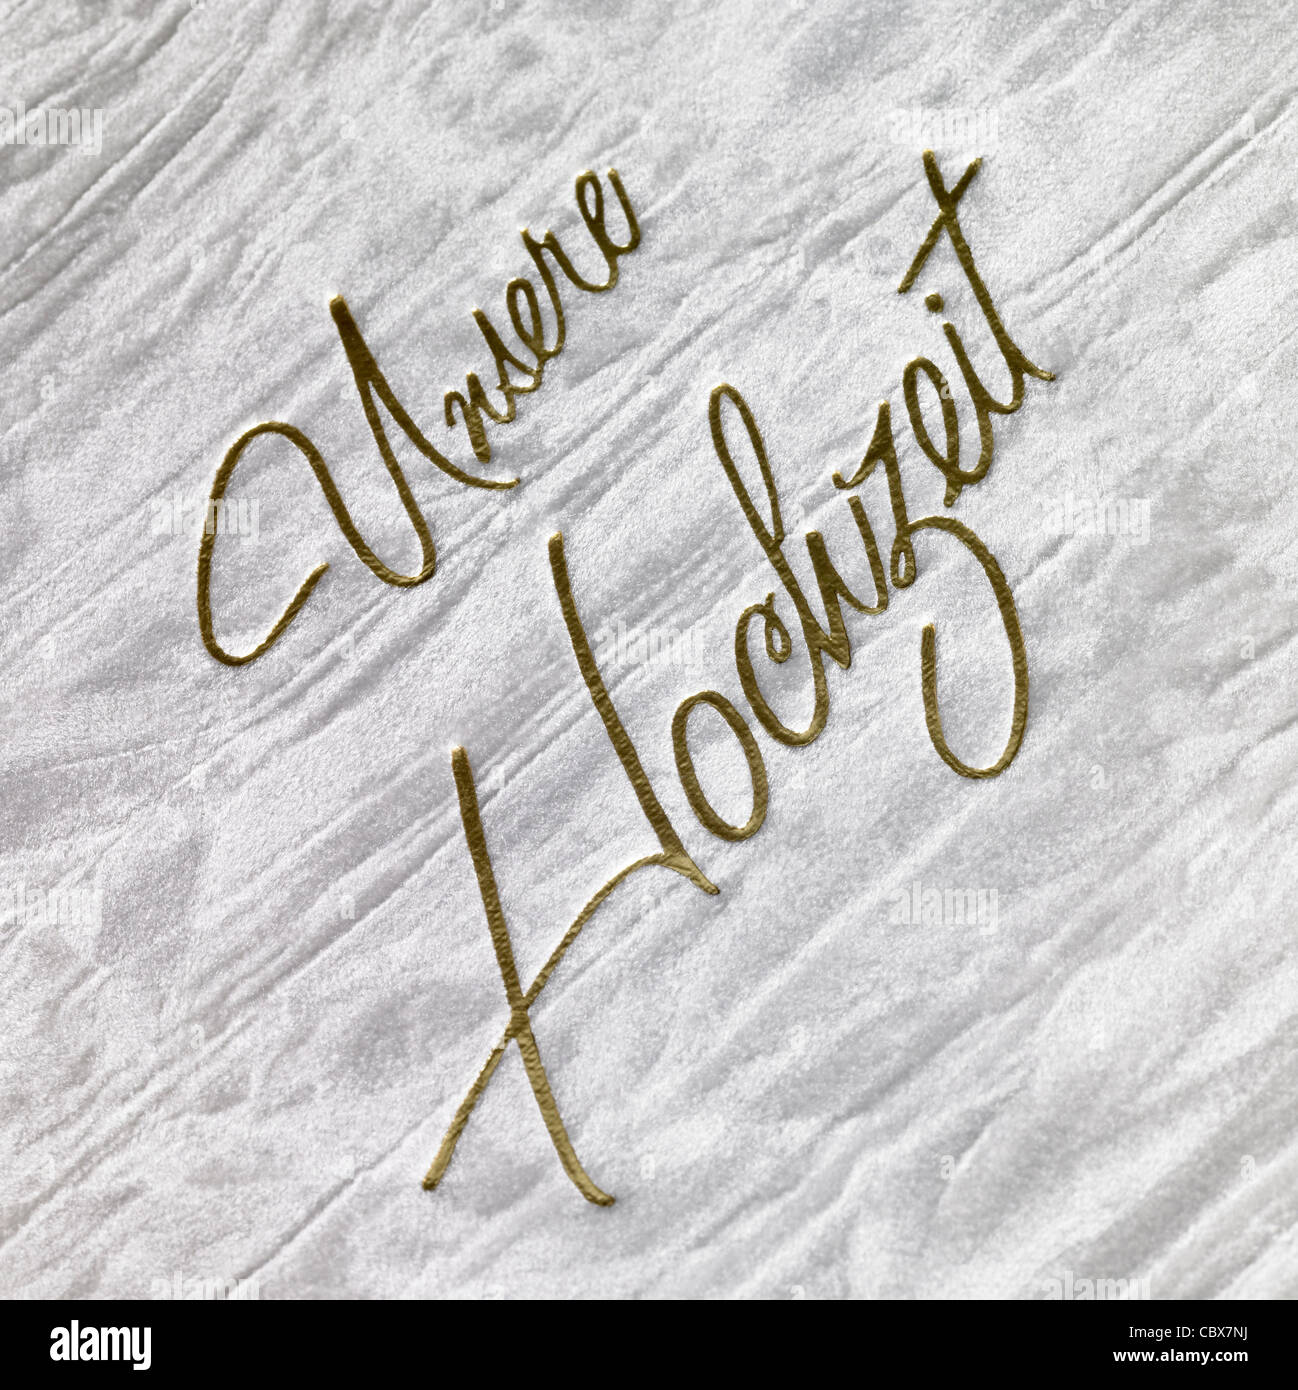 'Unsere Hochzeit' written in golden engraved Letters on abstract grey back Stock Photo